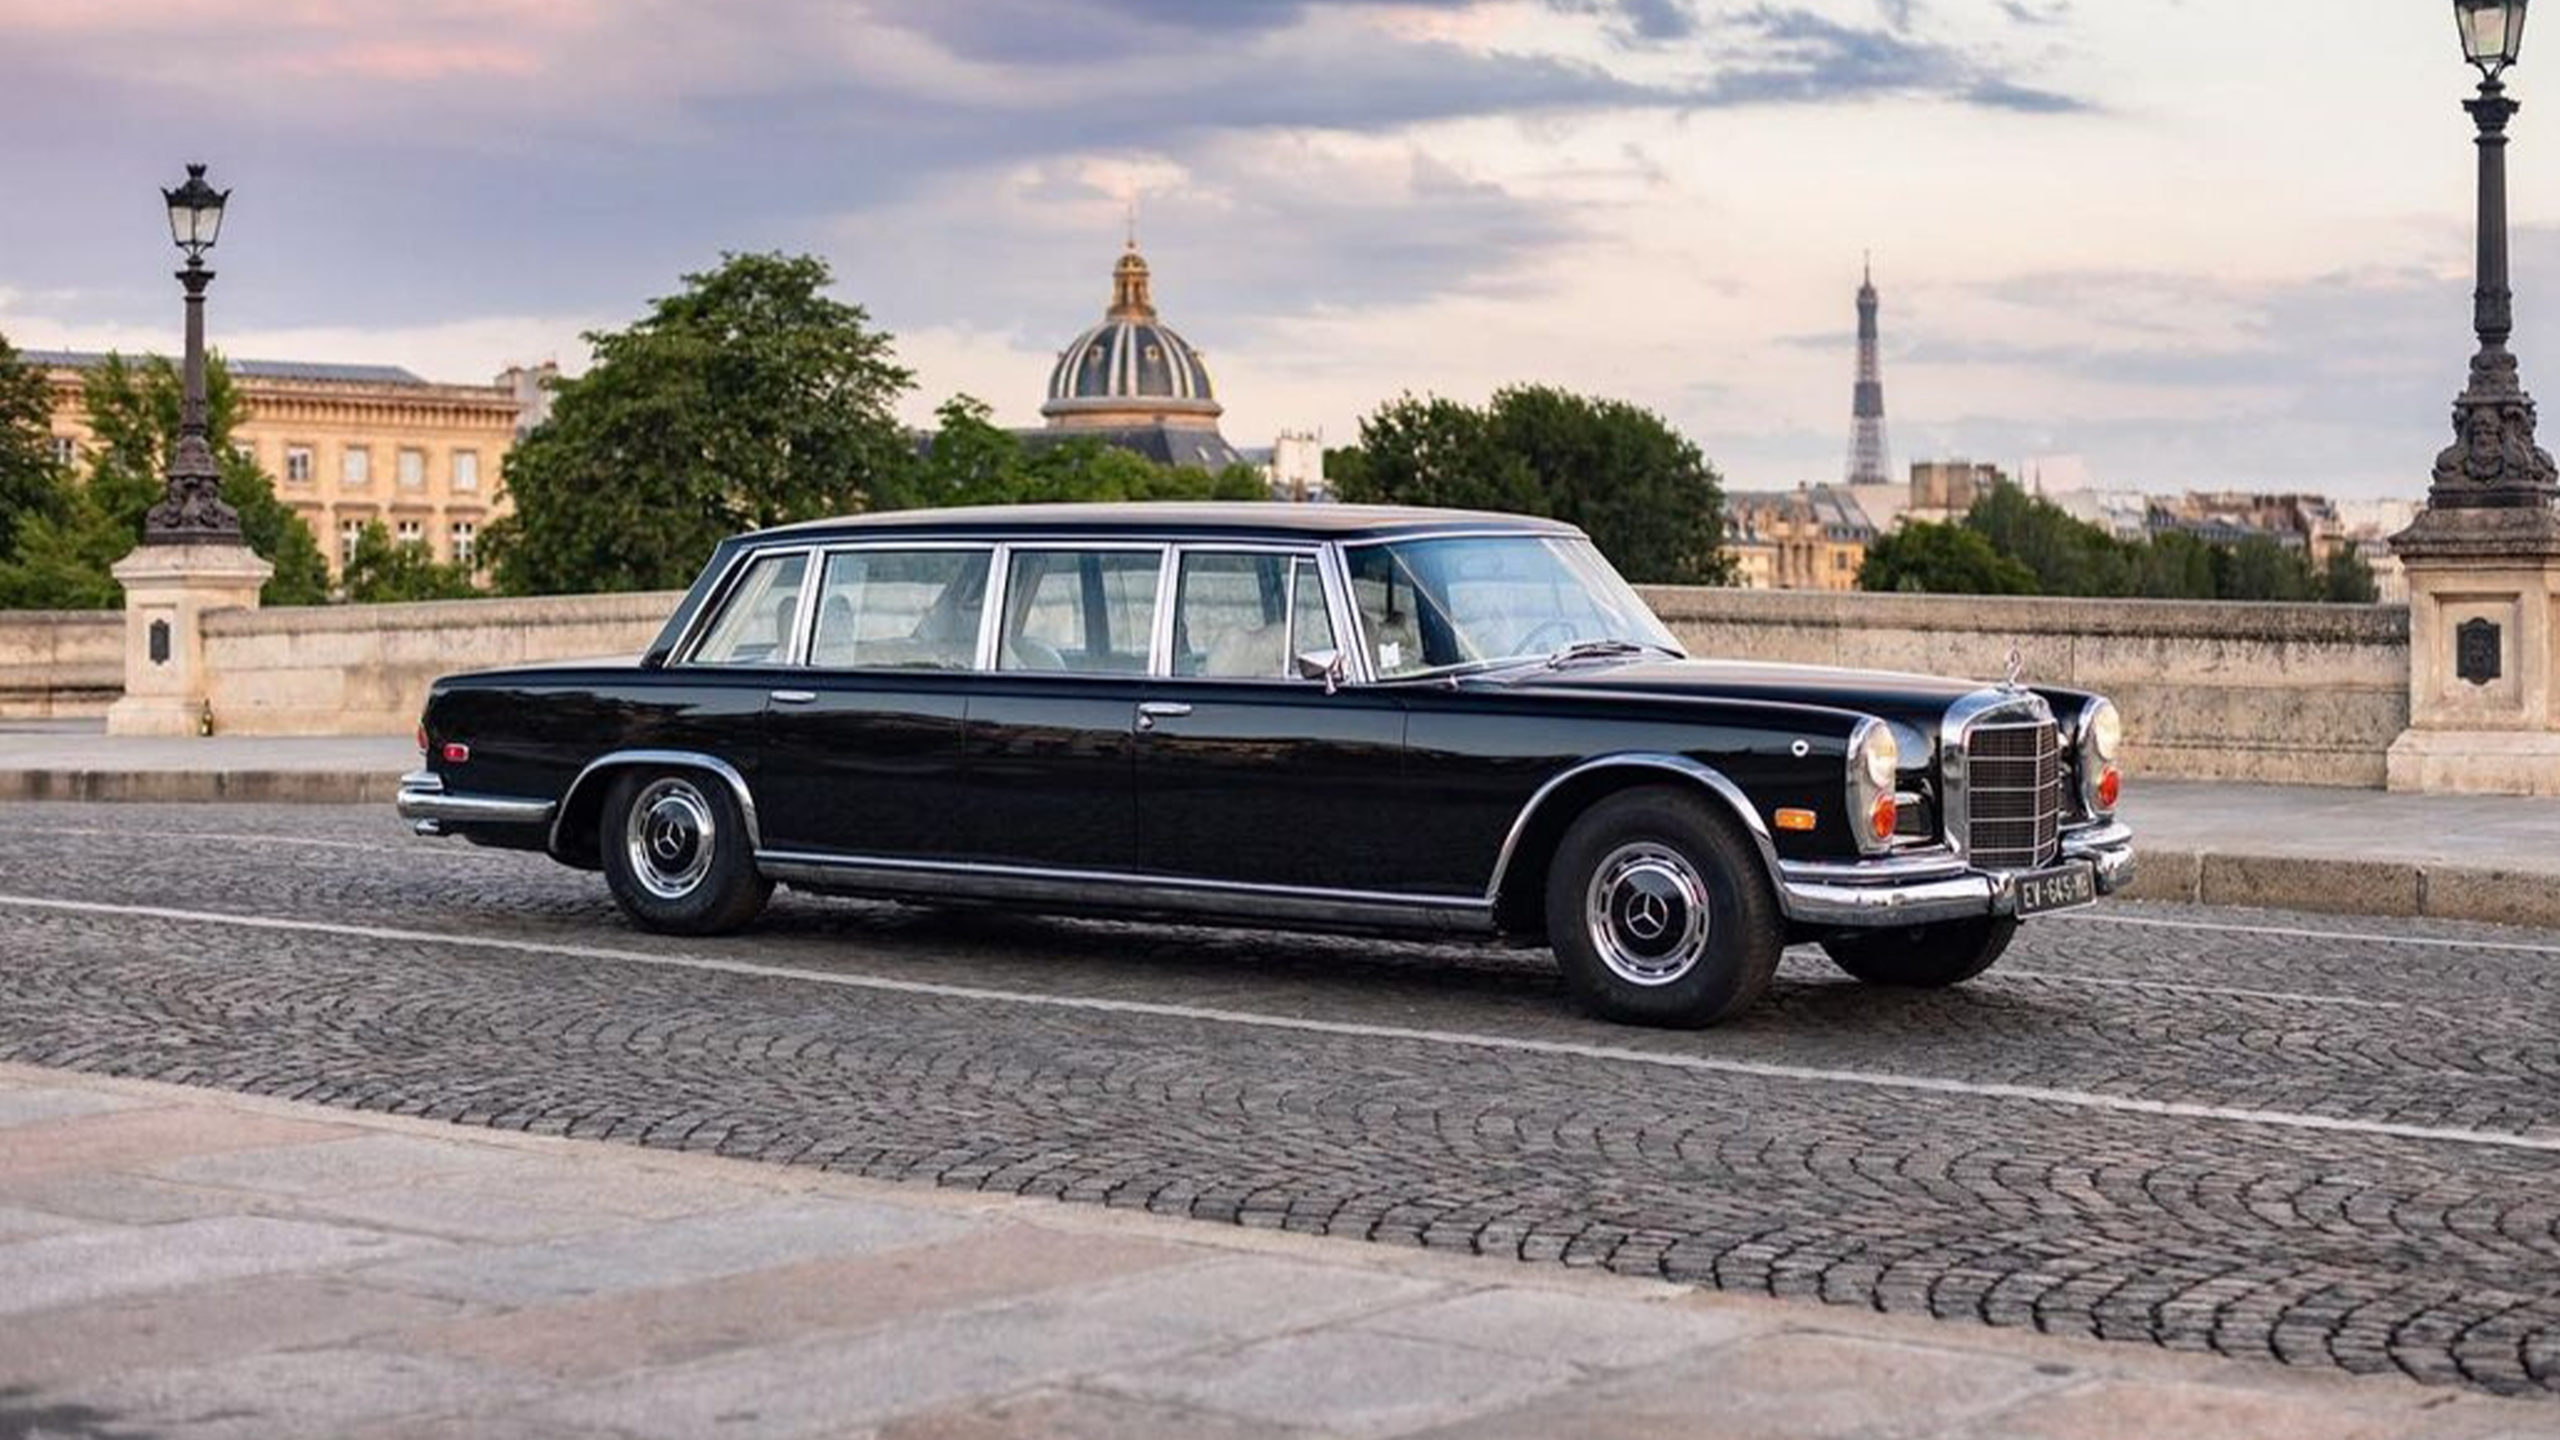 The Mercedes-Benz 600 Pullman: The Ultimate Status Symbol with a Long Wheelbase